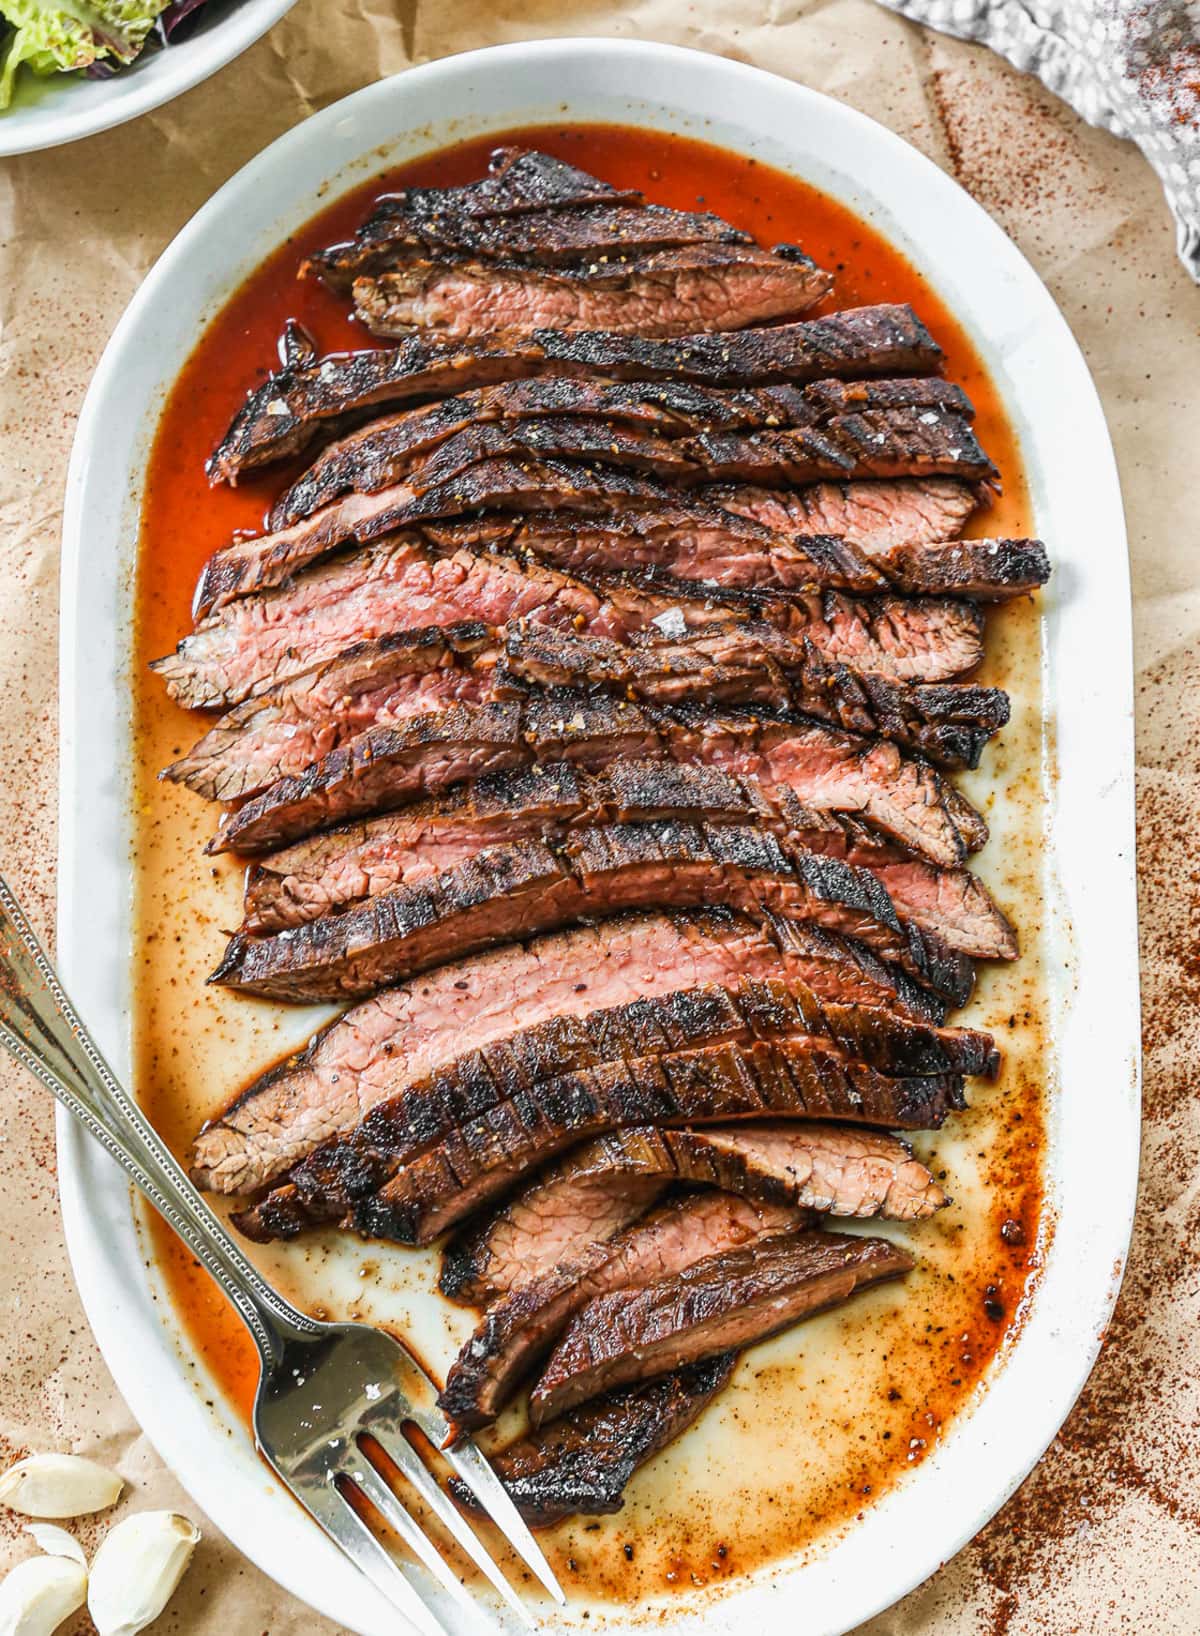 Grill Like a Pro: Tender and Juicy Grilled Flank Steak